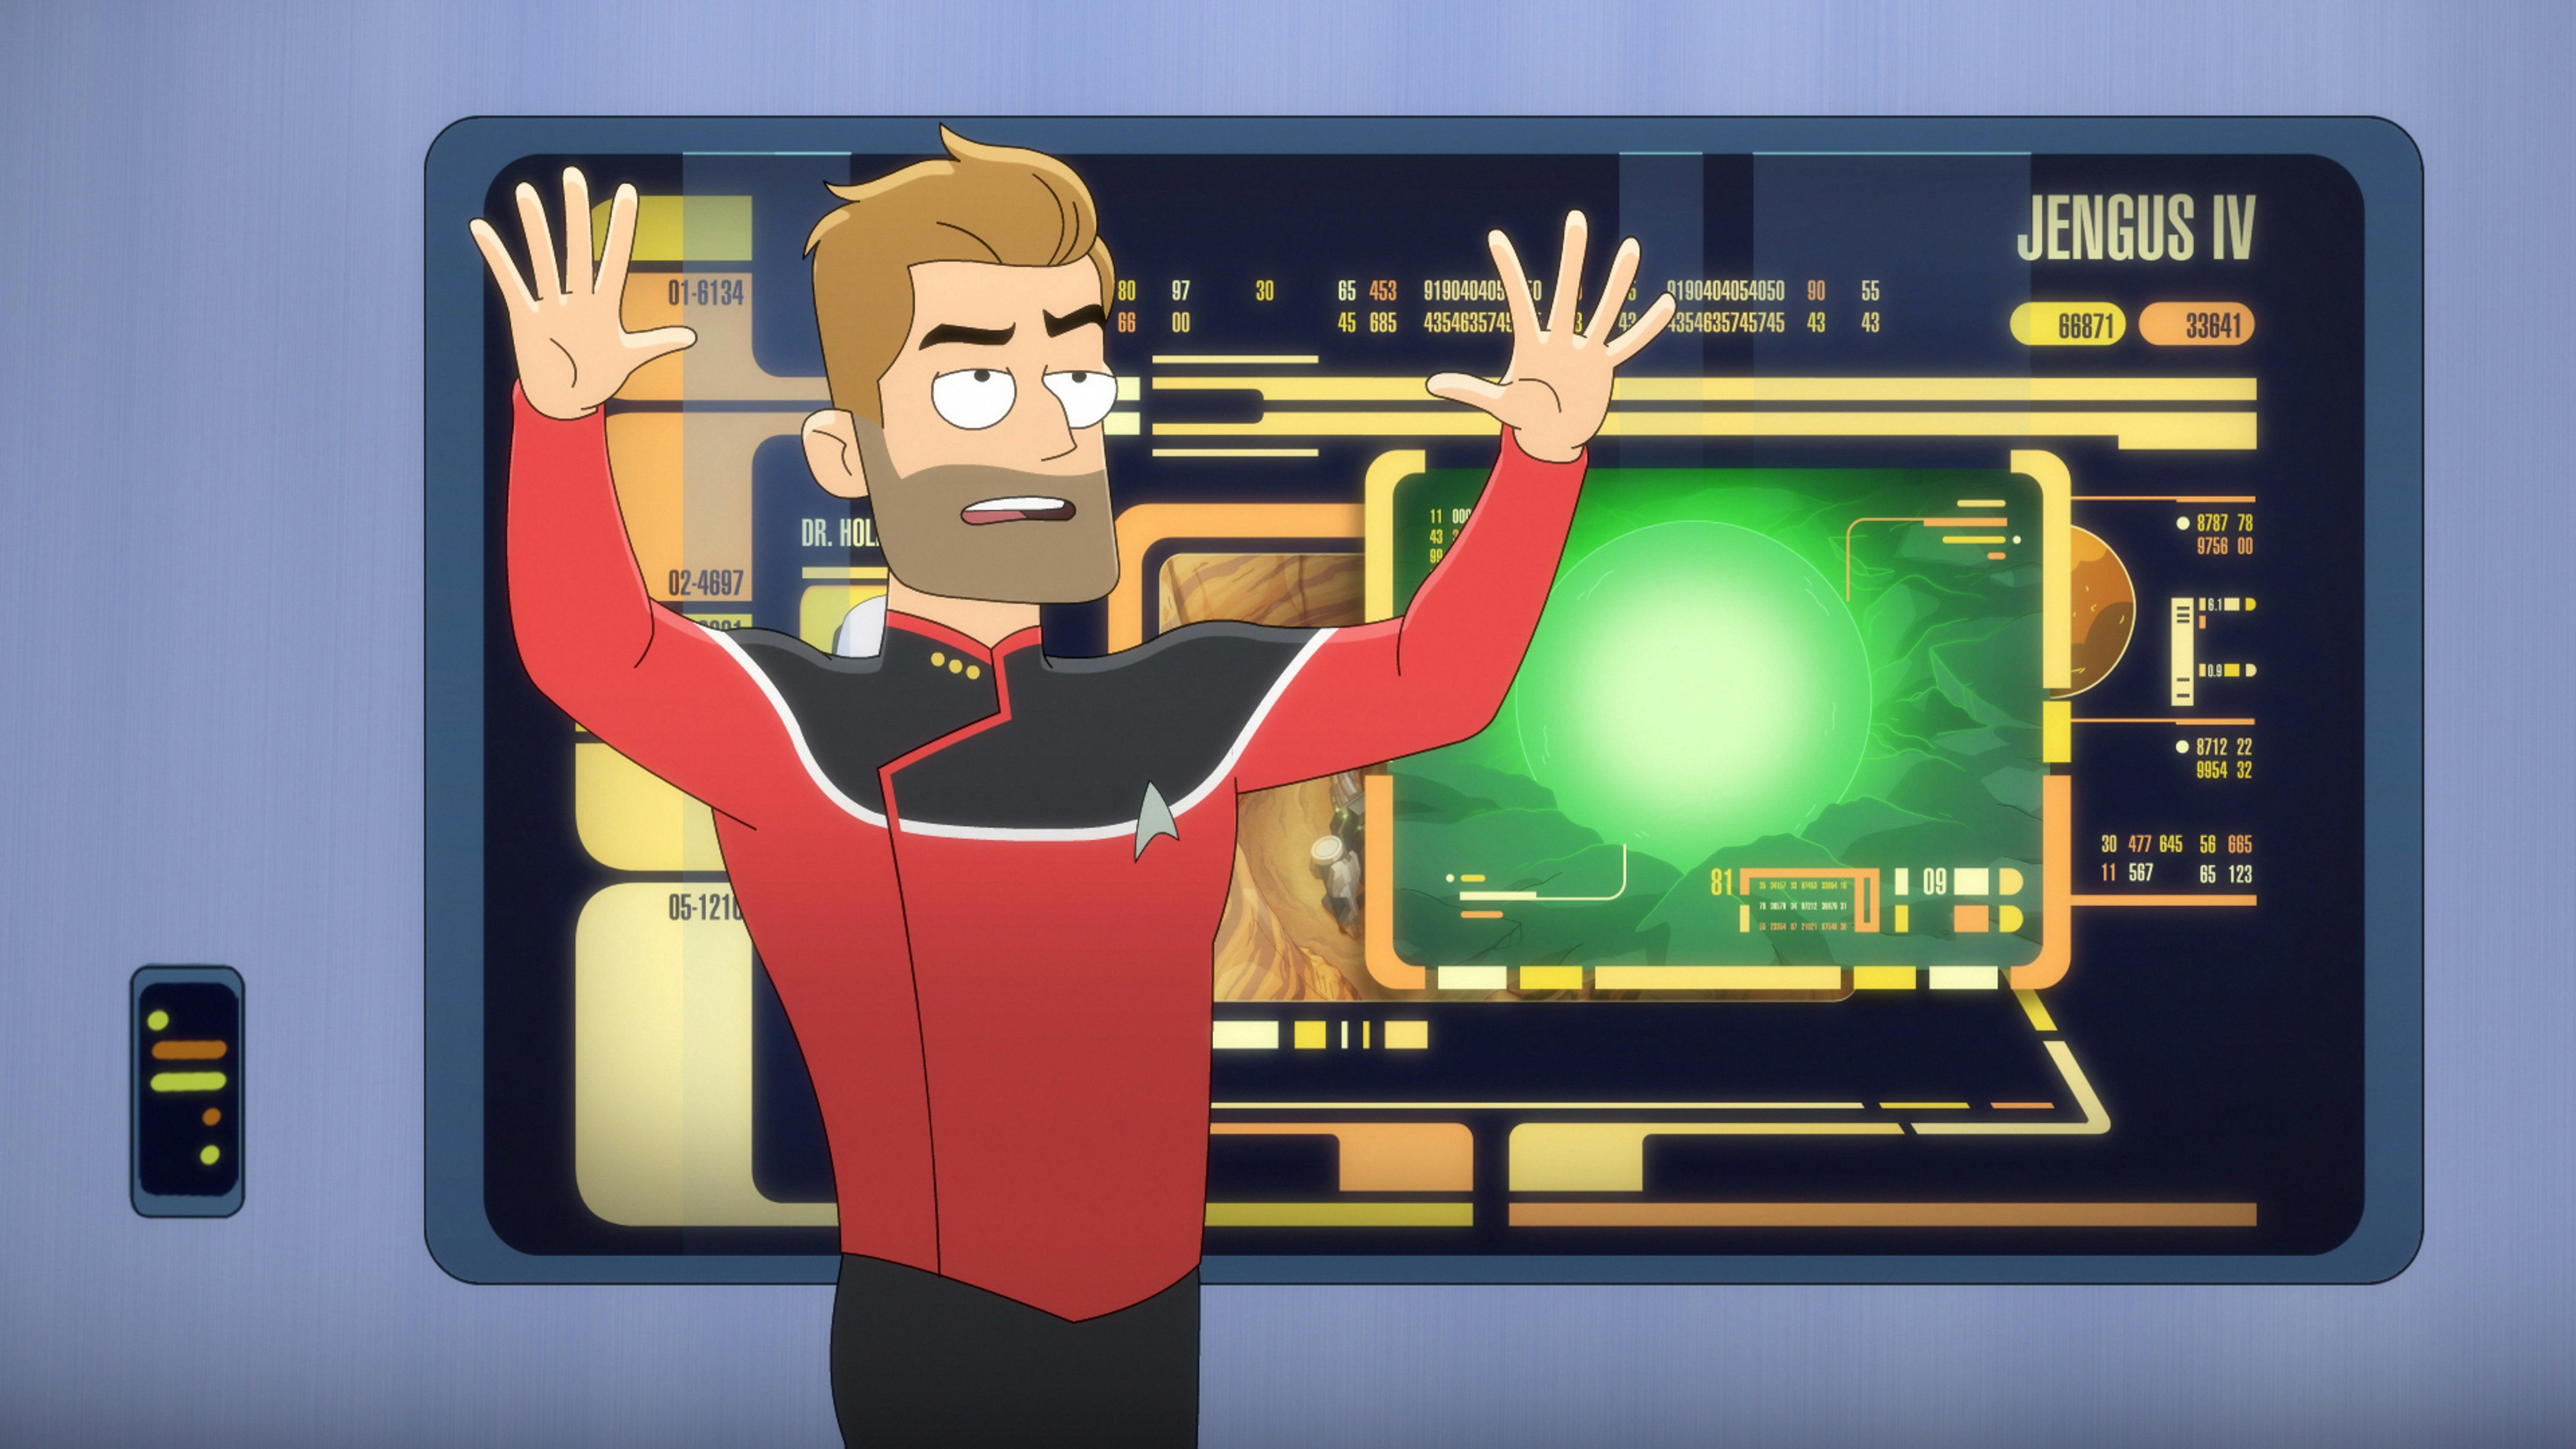 Commander Ransom gestures in front of a viewscreen.